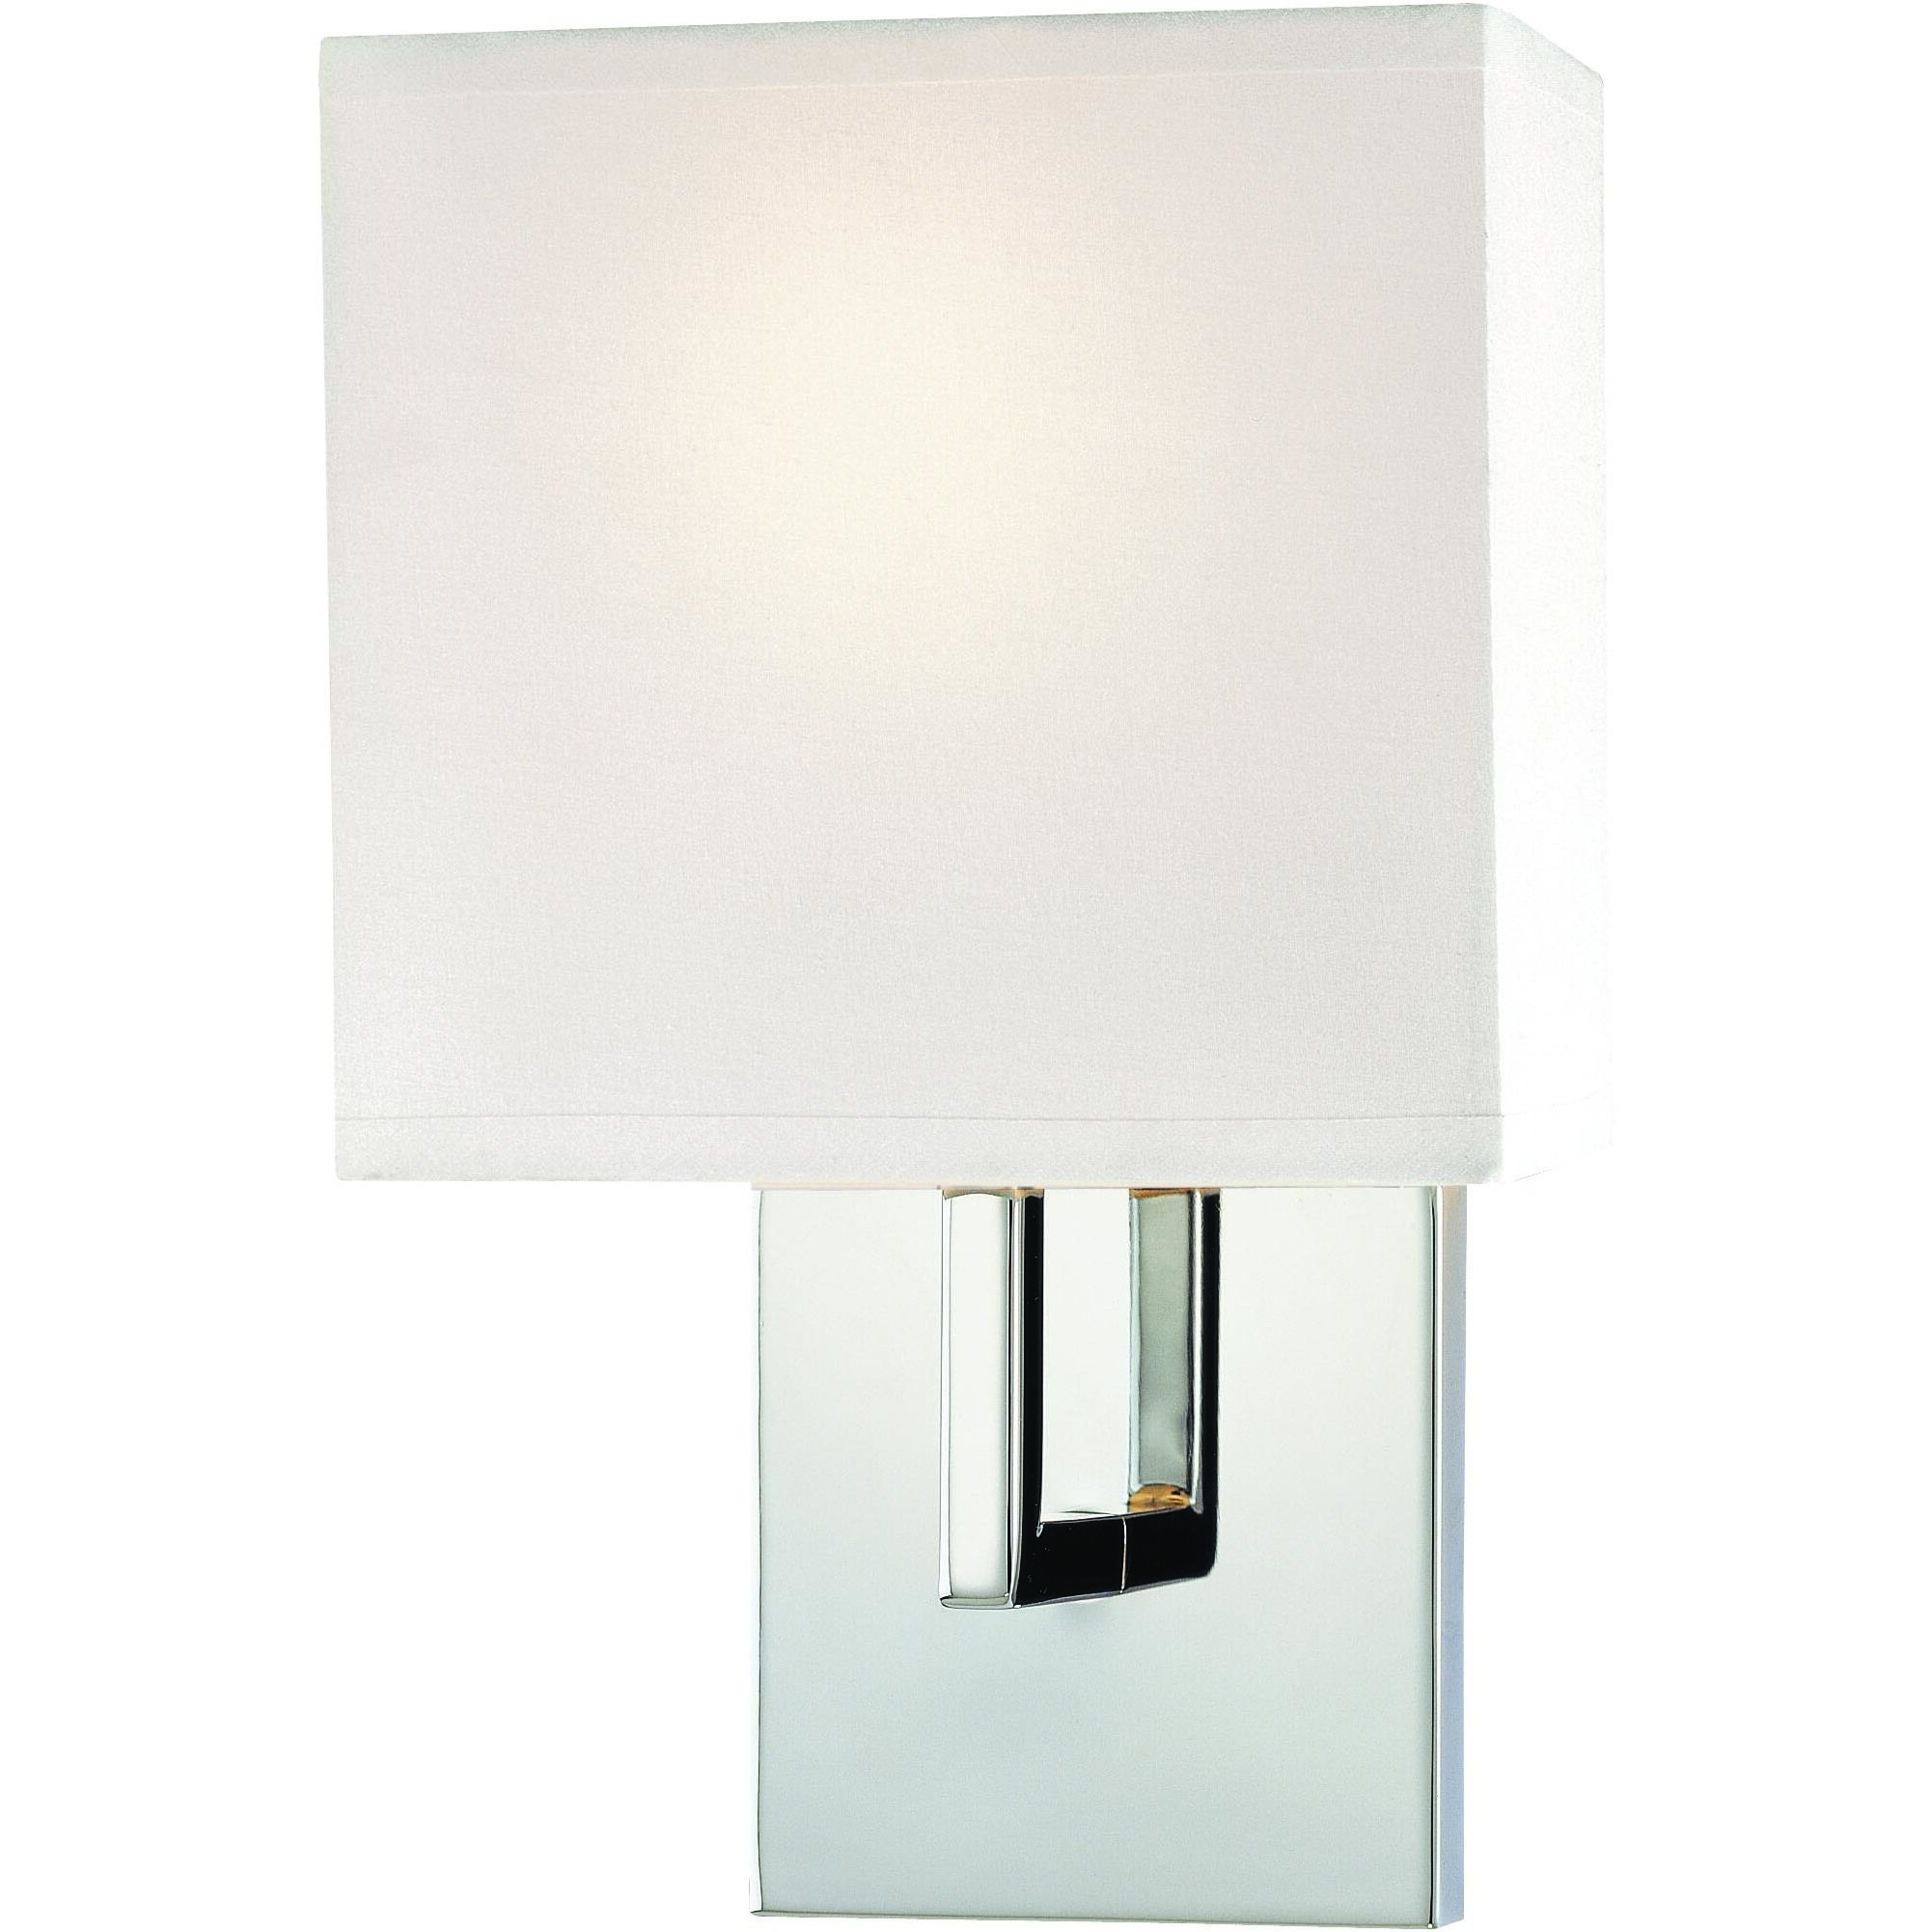 GK Wall Sconce